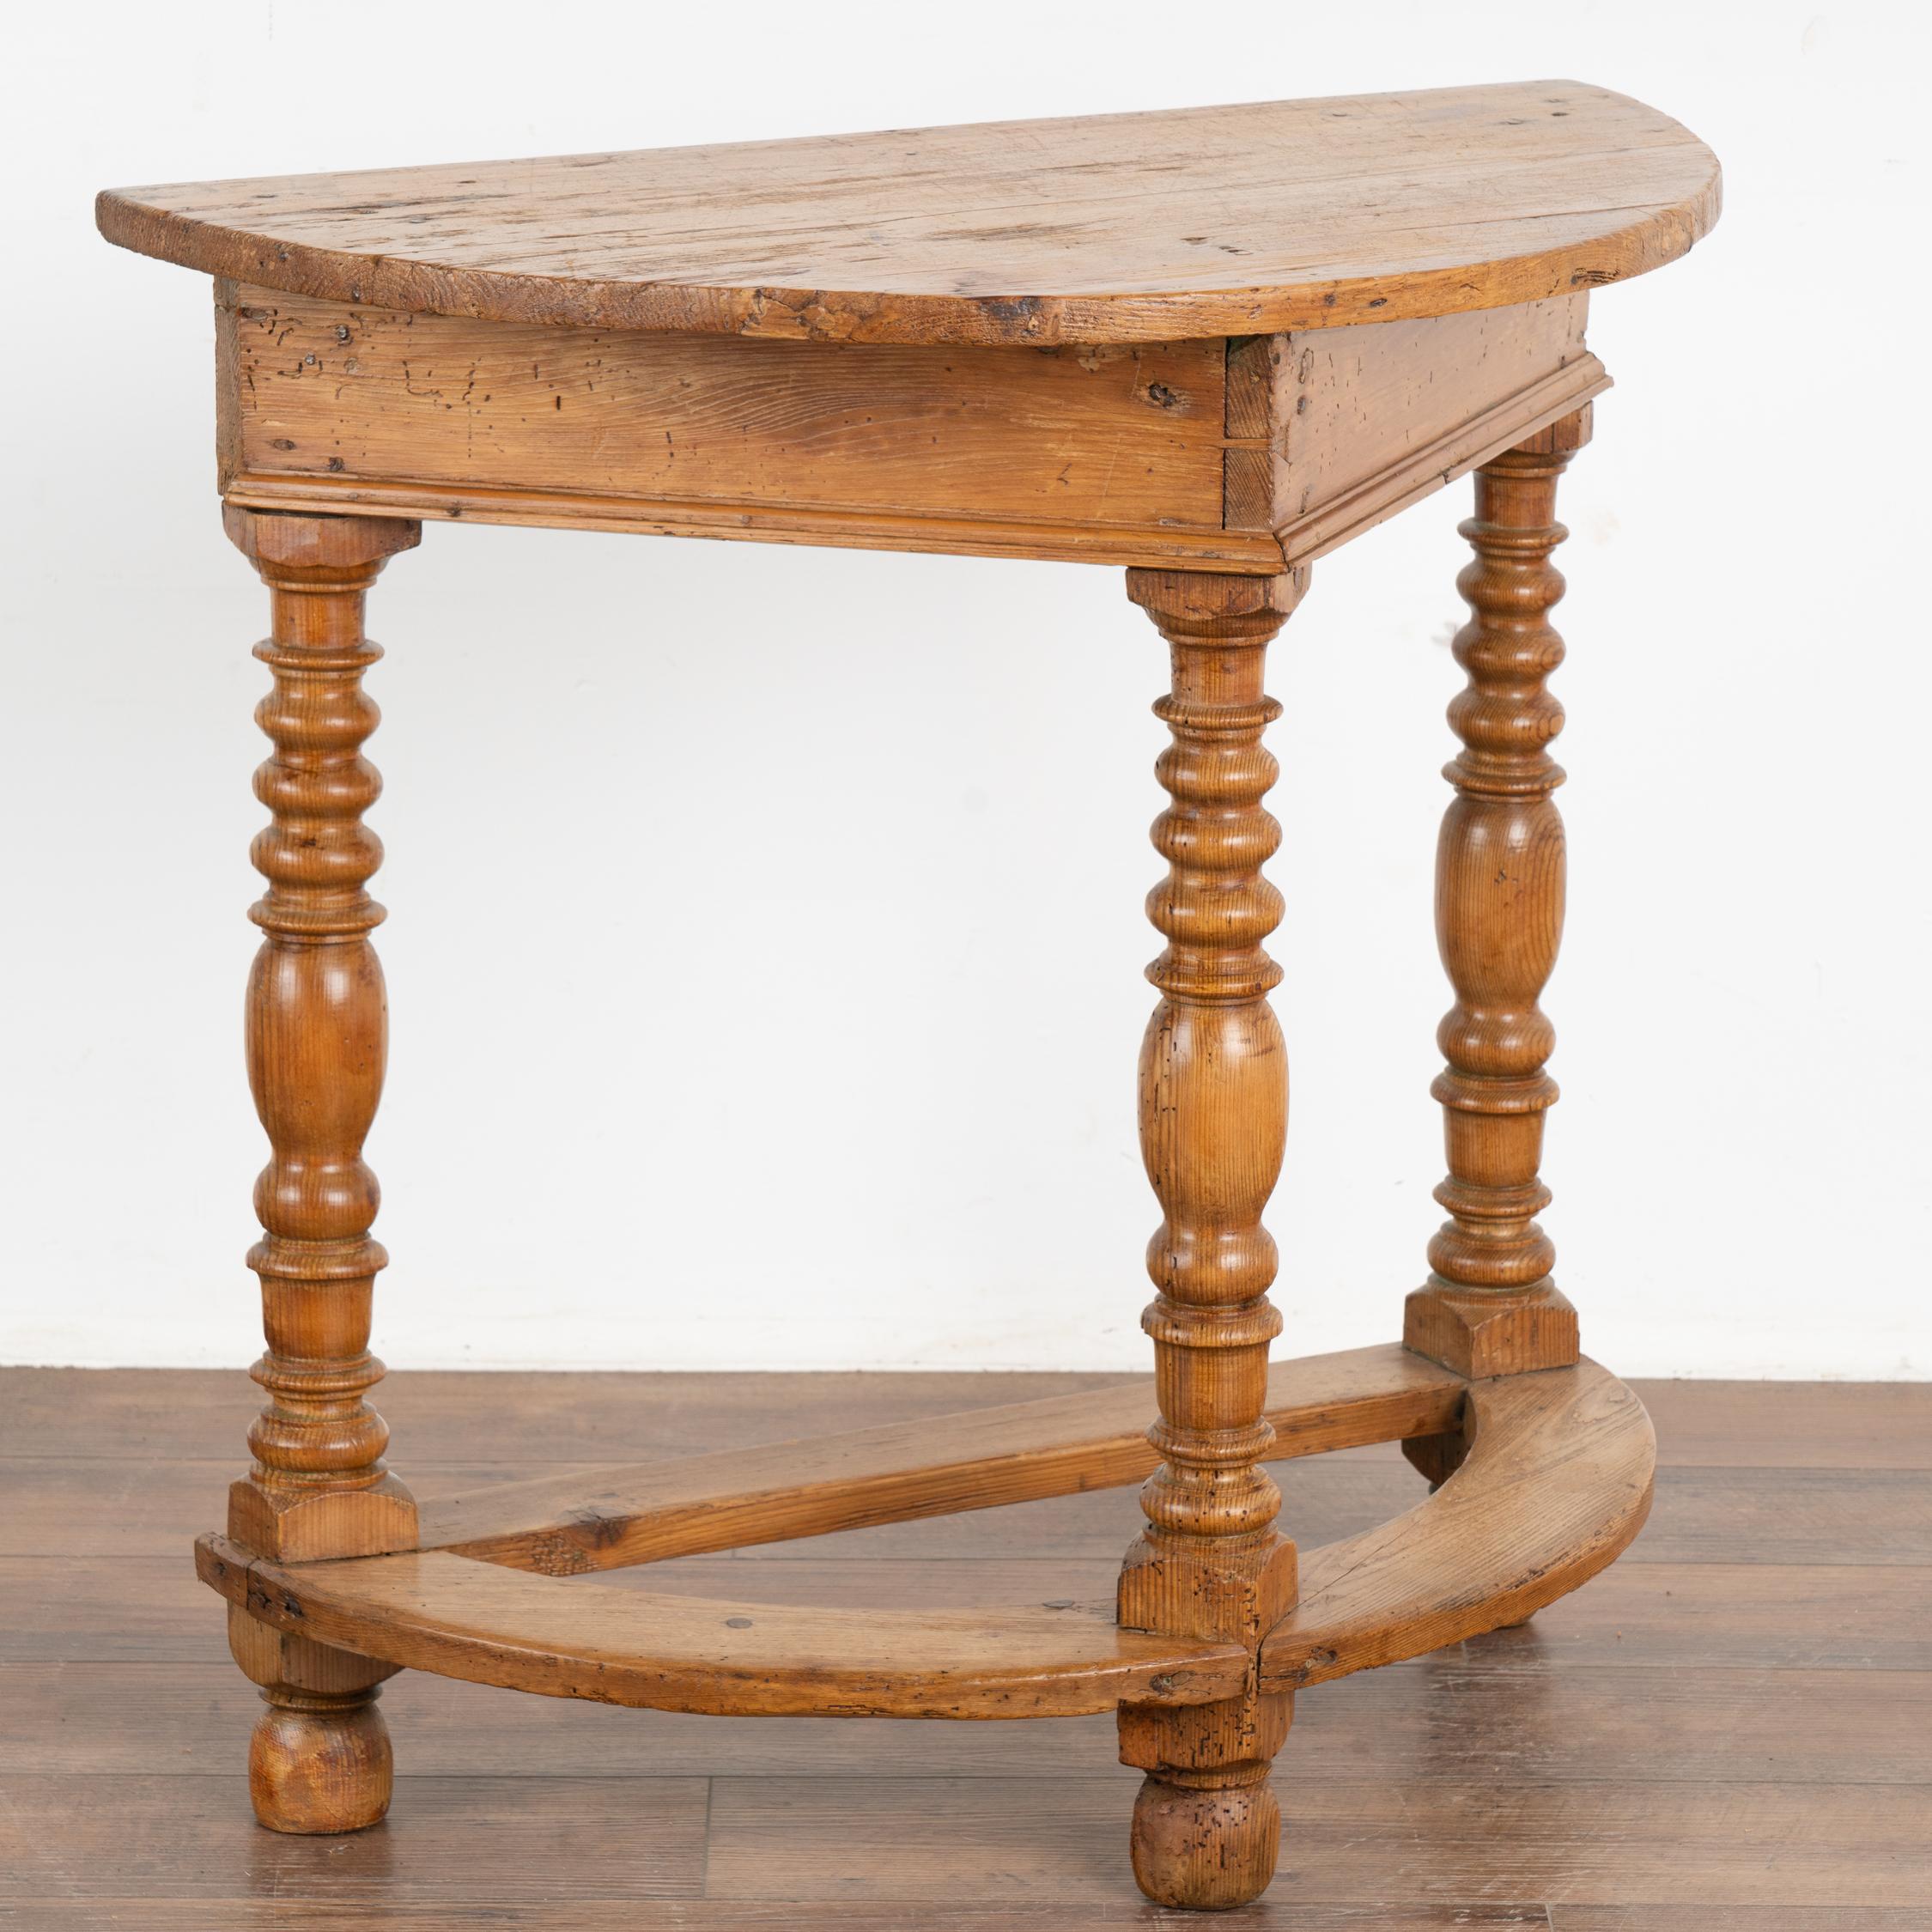 It is the generations of use that create the deep, attractive aged patina of this pine side table.
The three decorative turned legs with trestle base create visual appeal to the half-moon shape of the table.
Professionally restored, this table is